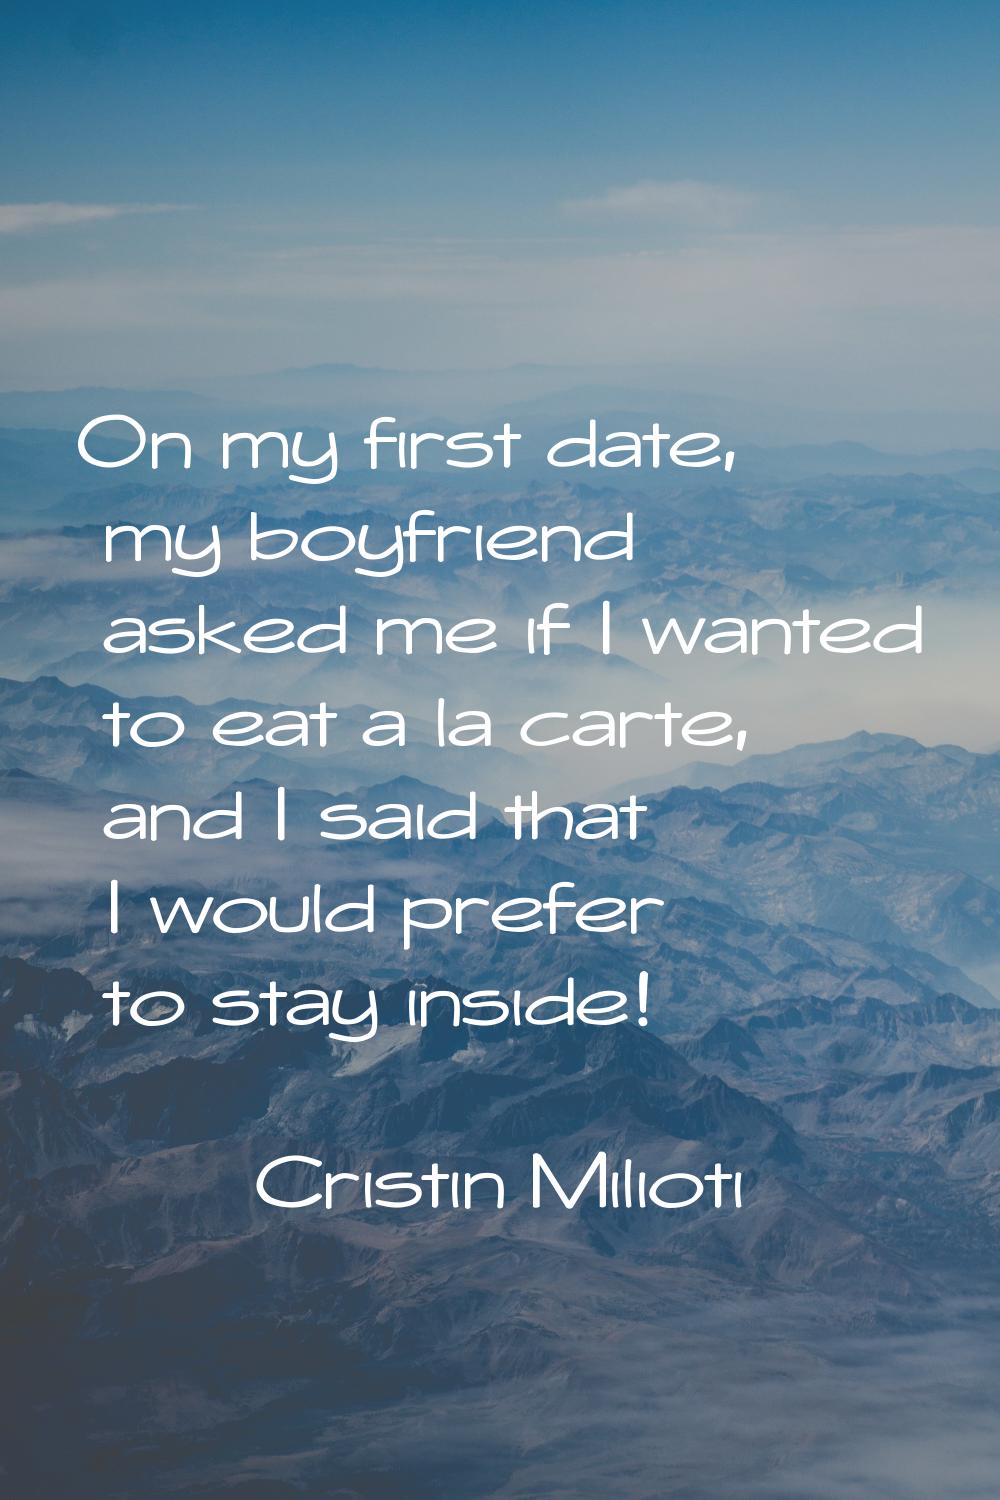 On my first date, my boyfriend asked me if I wanted to eat a la carte, and I said that I would pref